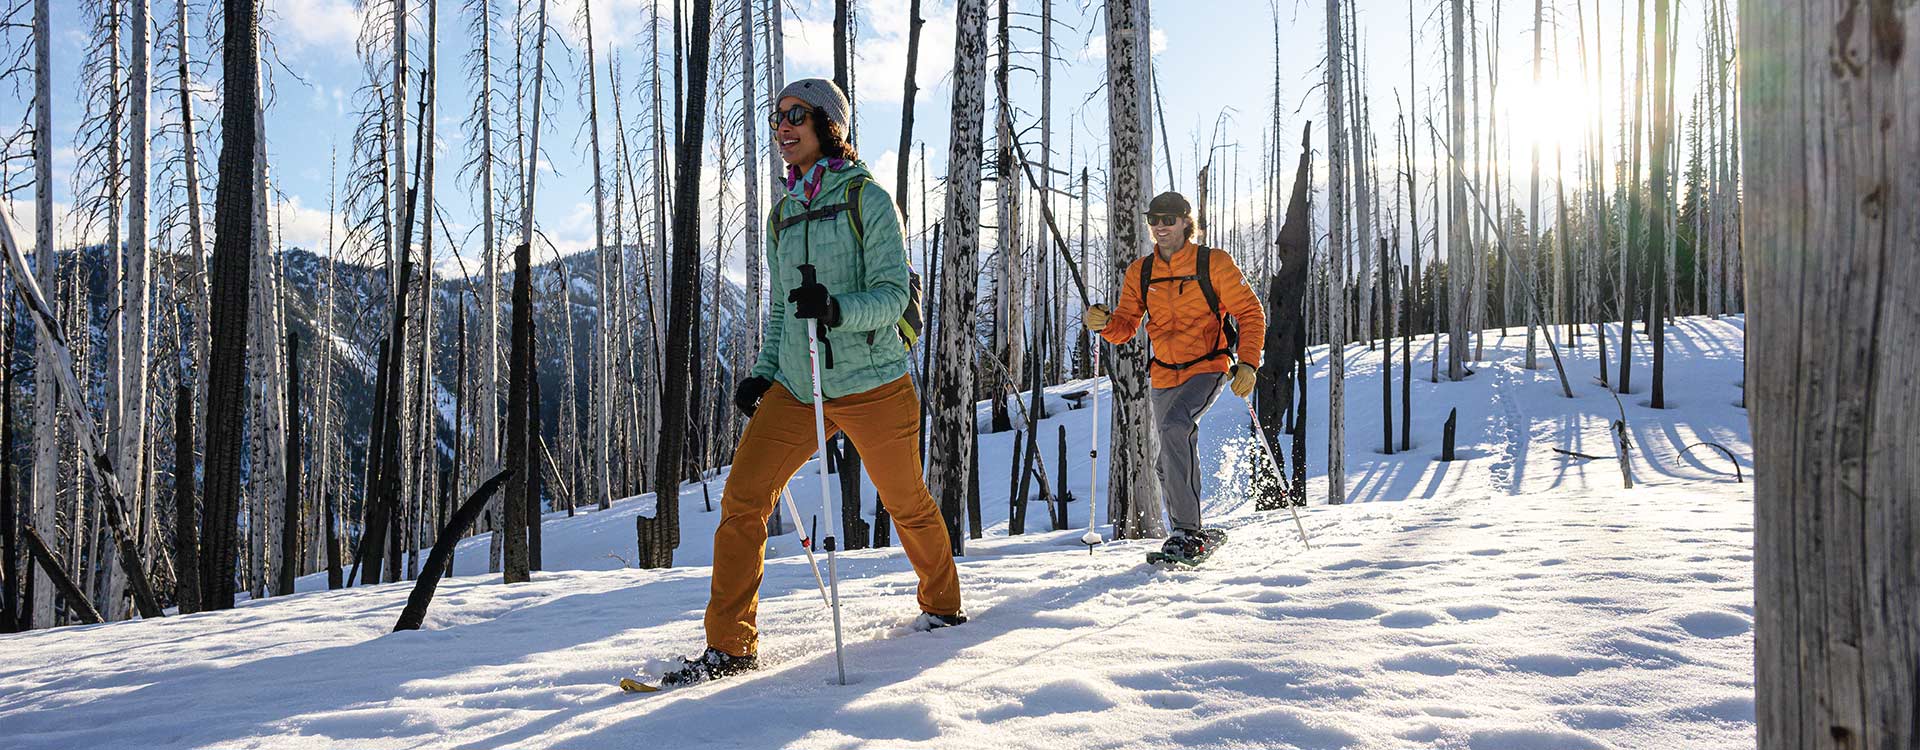 Up to 25% Off - Save big on snowshoes, tents & more.